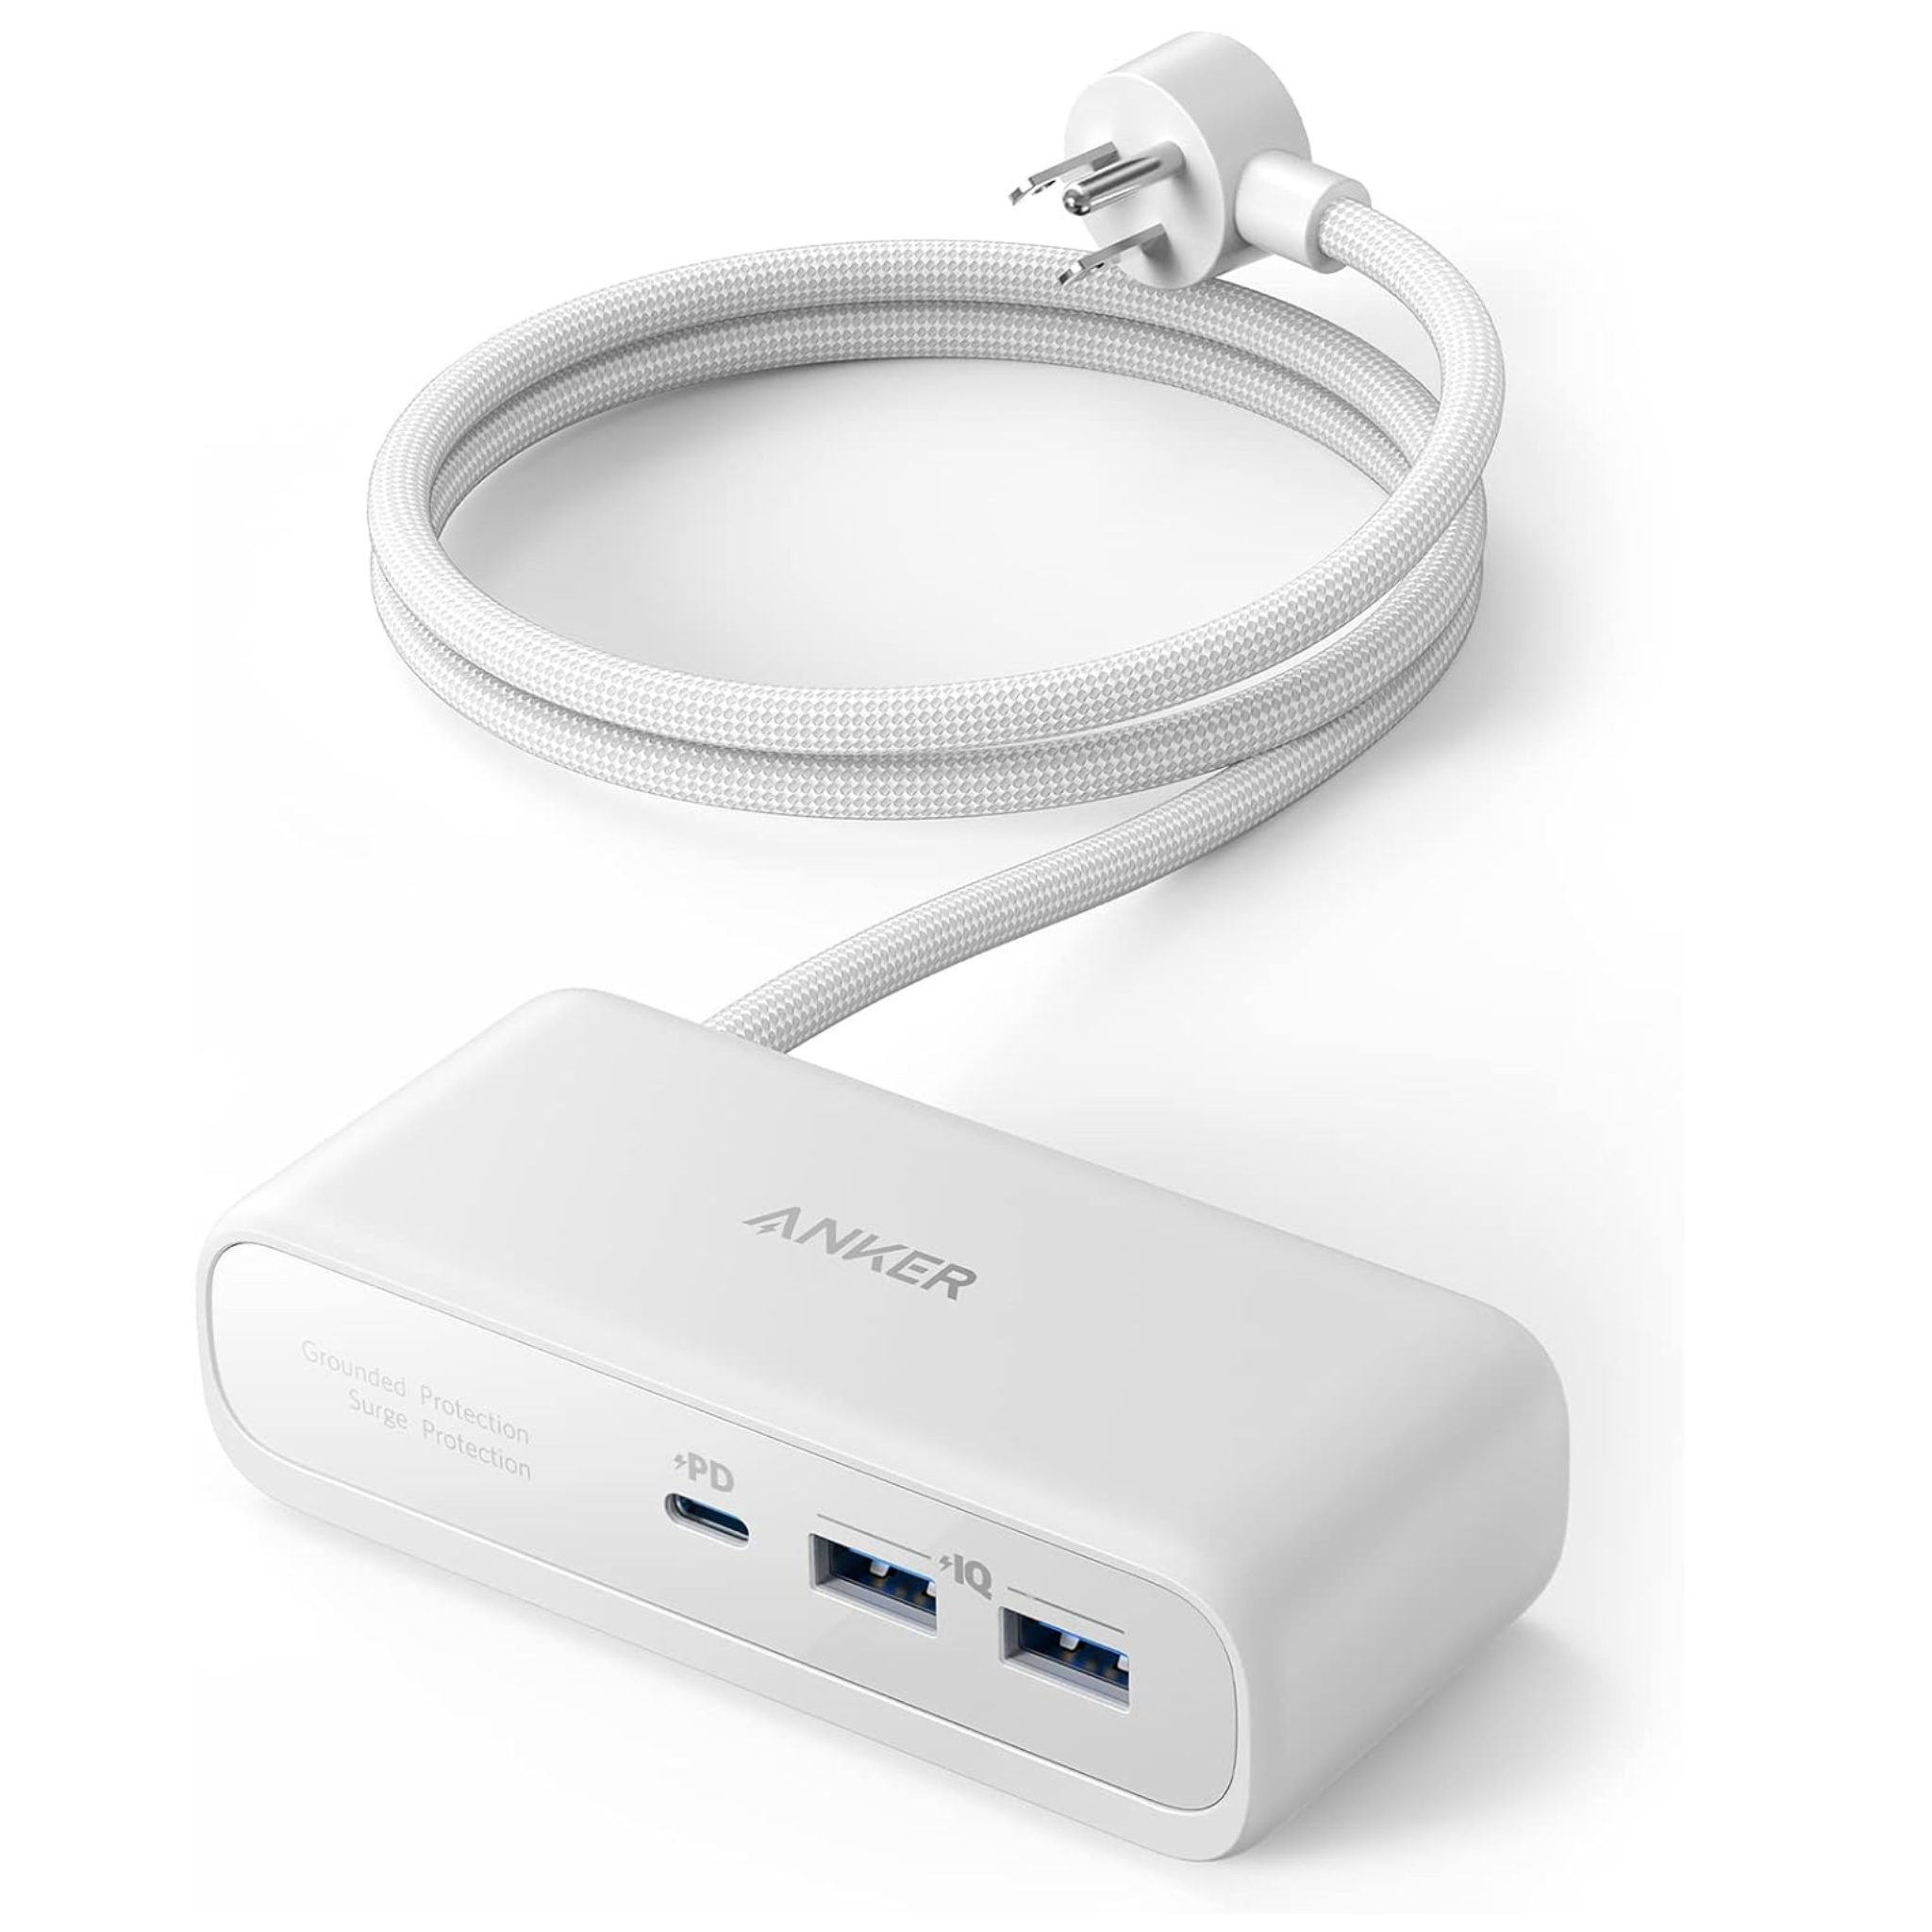 Anker 521 Power Strip Charging Station With 5′ Extension Cord